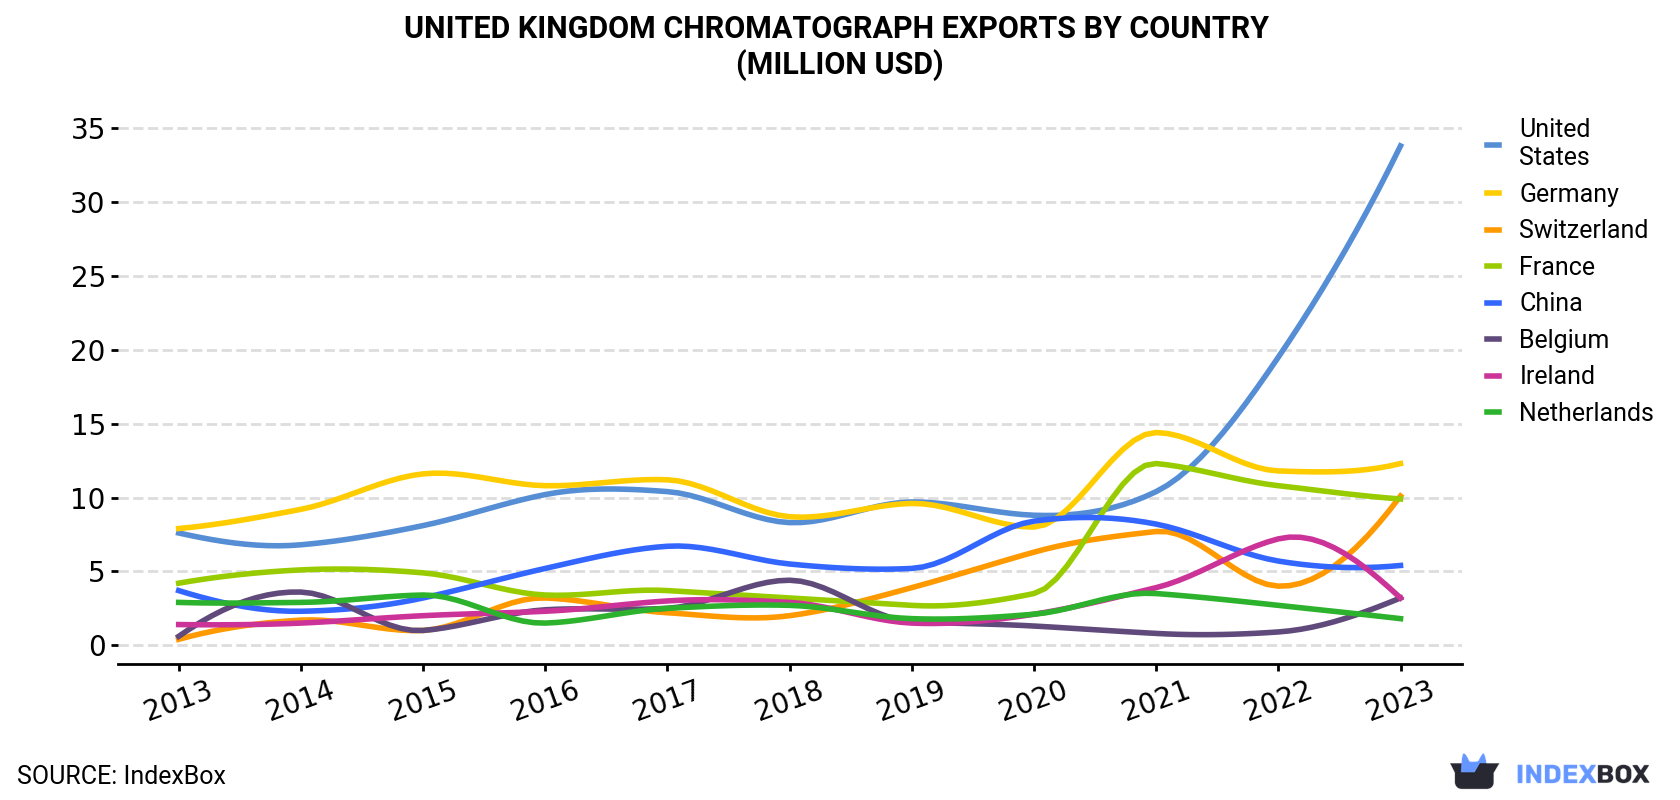 United Kingdom Chromatograph Exports By Country (Million USD)